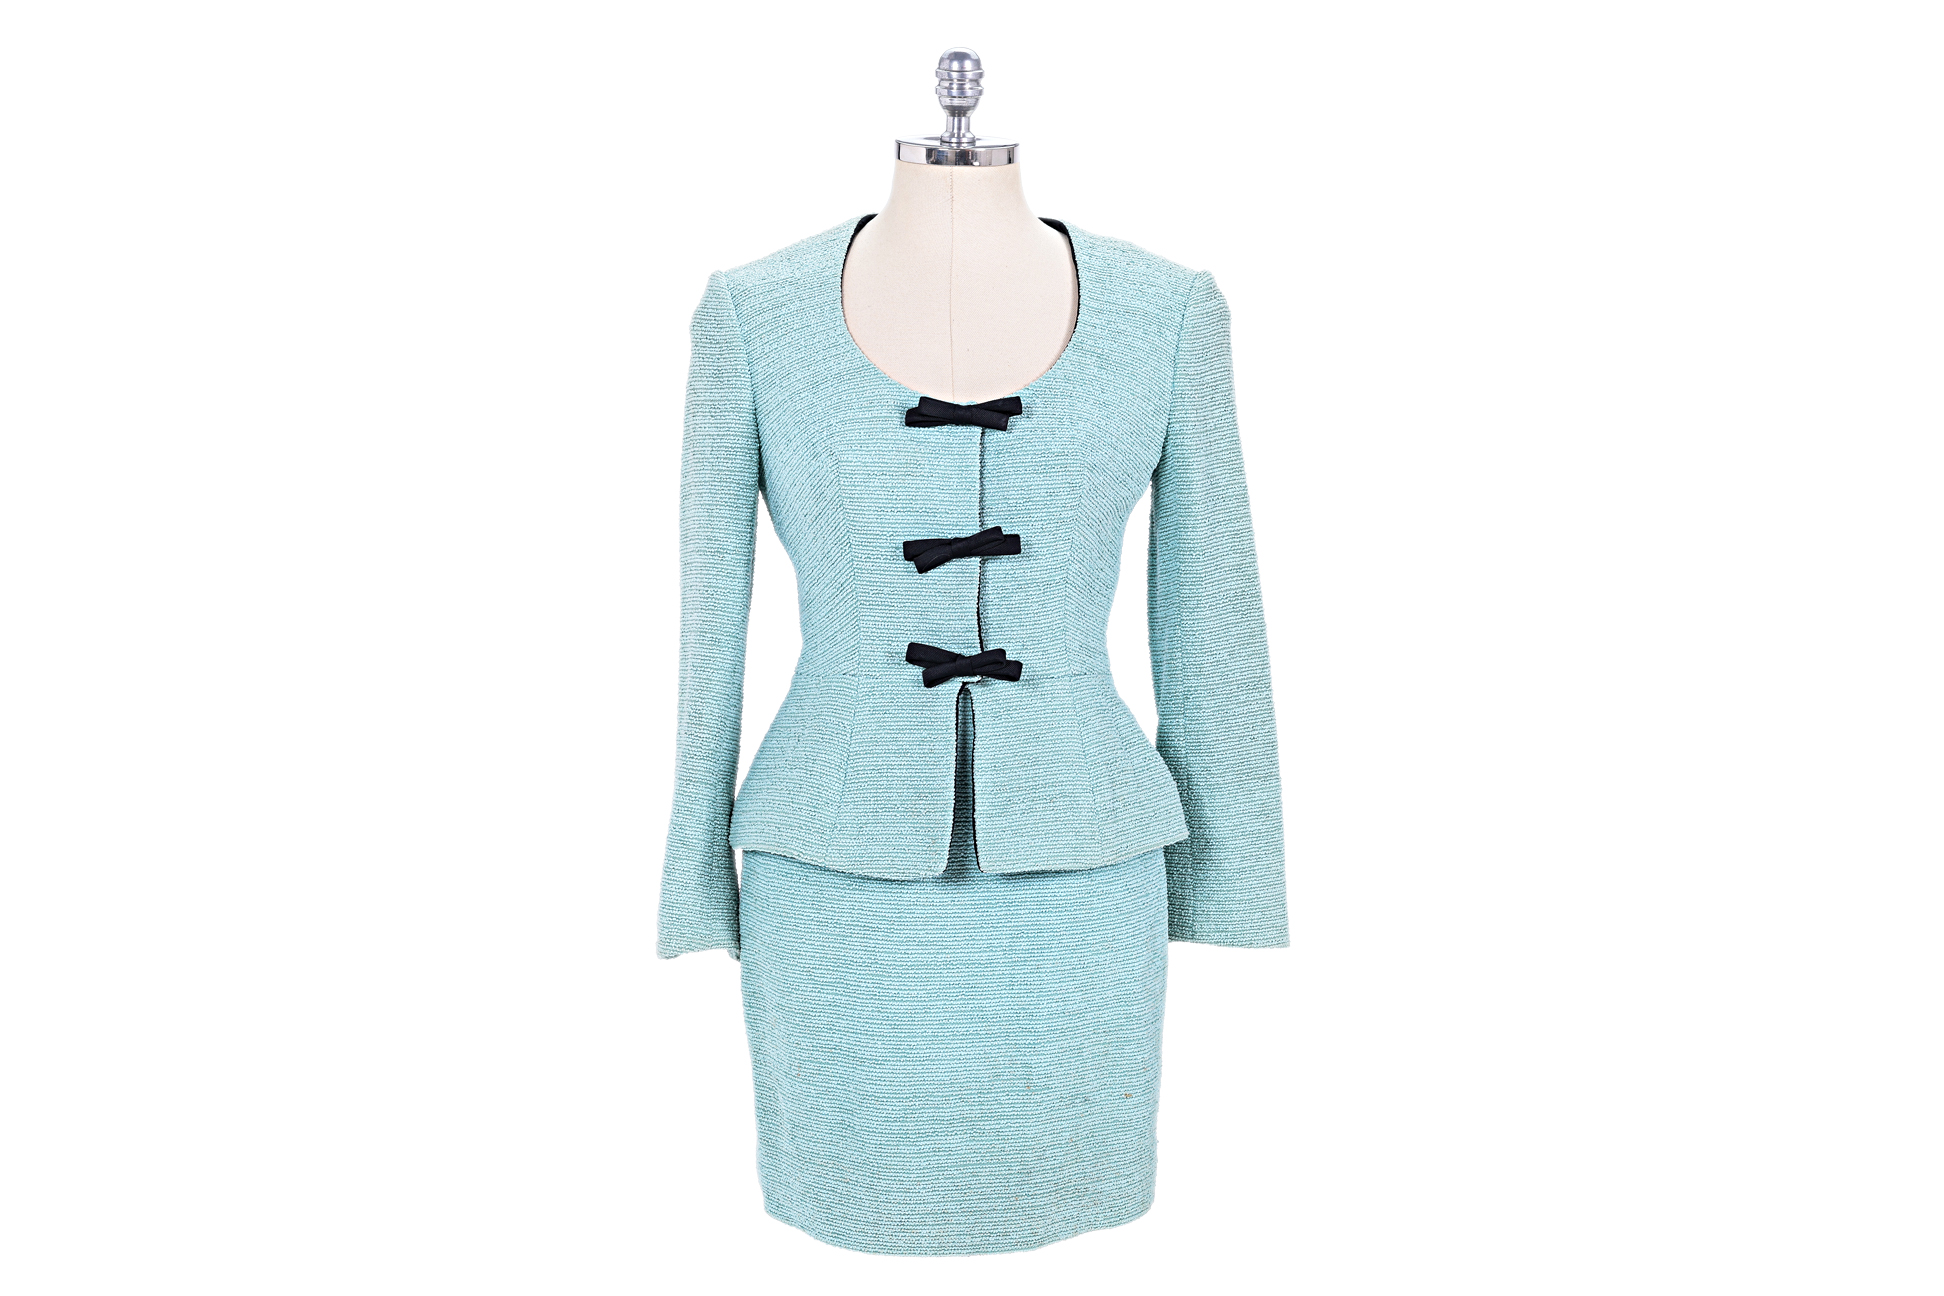 A CHRISTIAN DIOR TWO-PIECE SKIRT SUIT